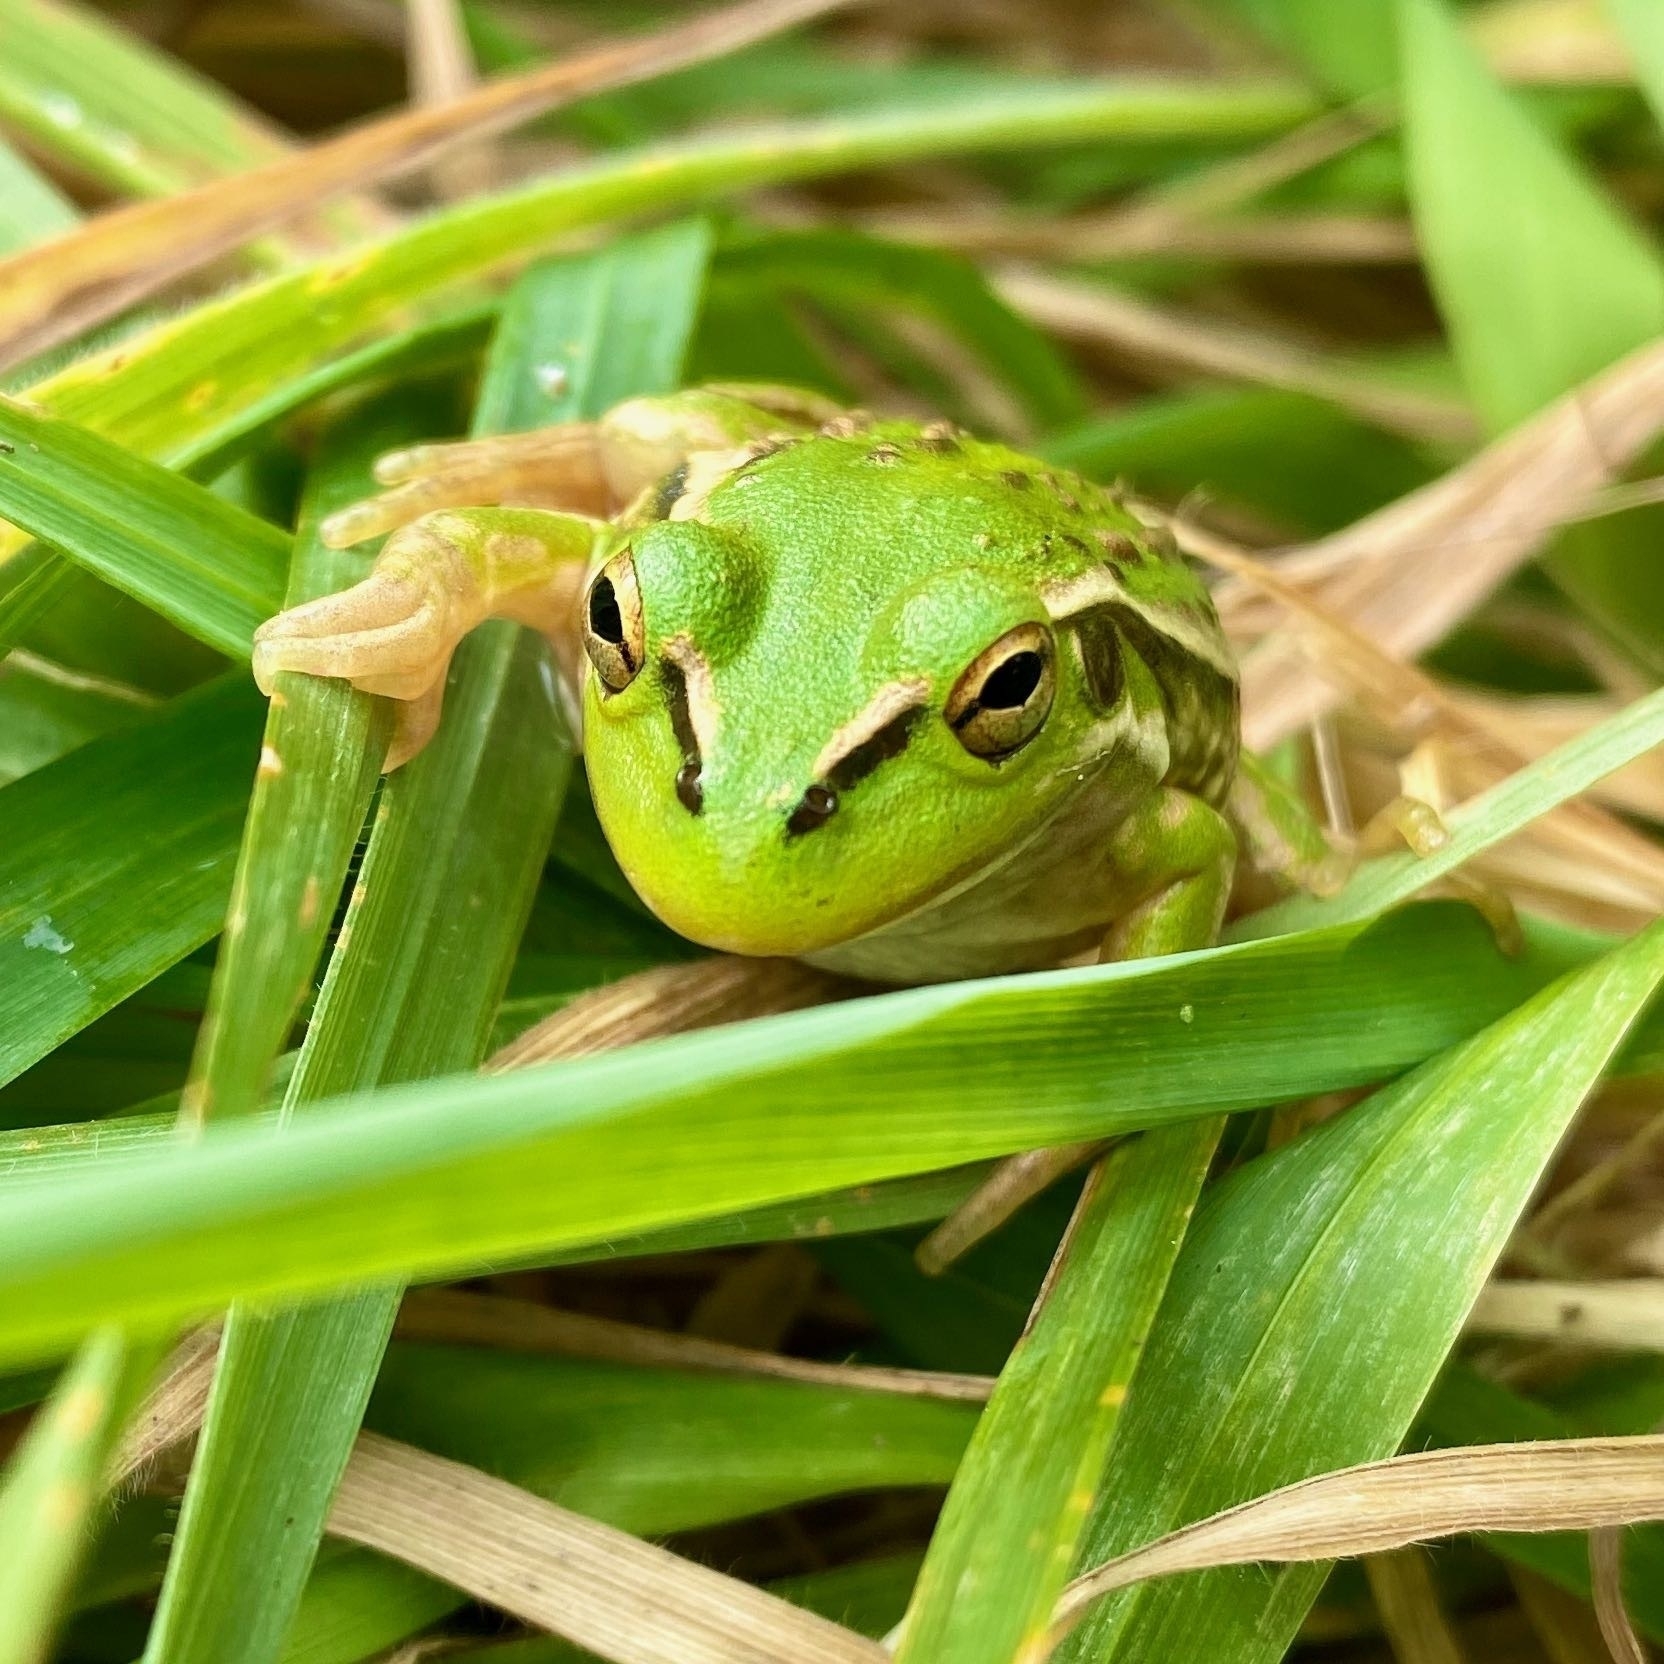 Small bright green frog with golden stripes and bumps, on grass. View of its face and feet. 